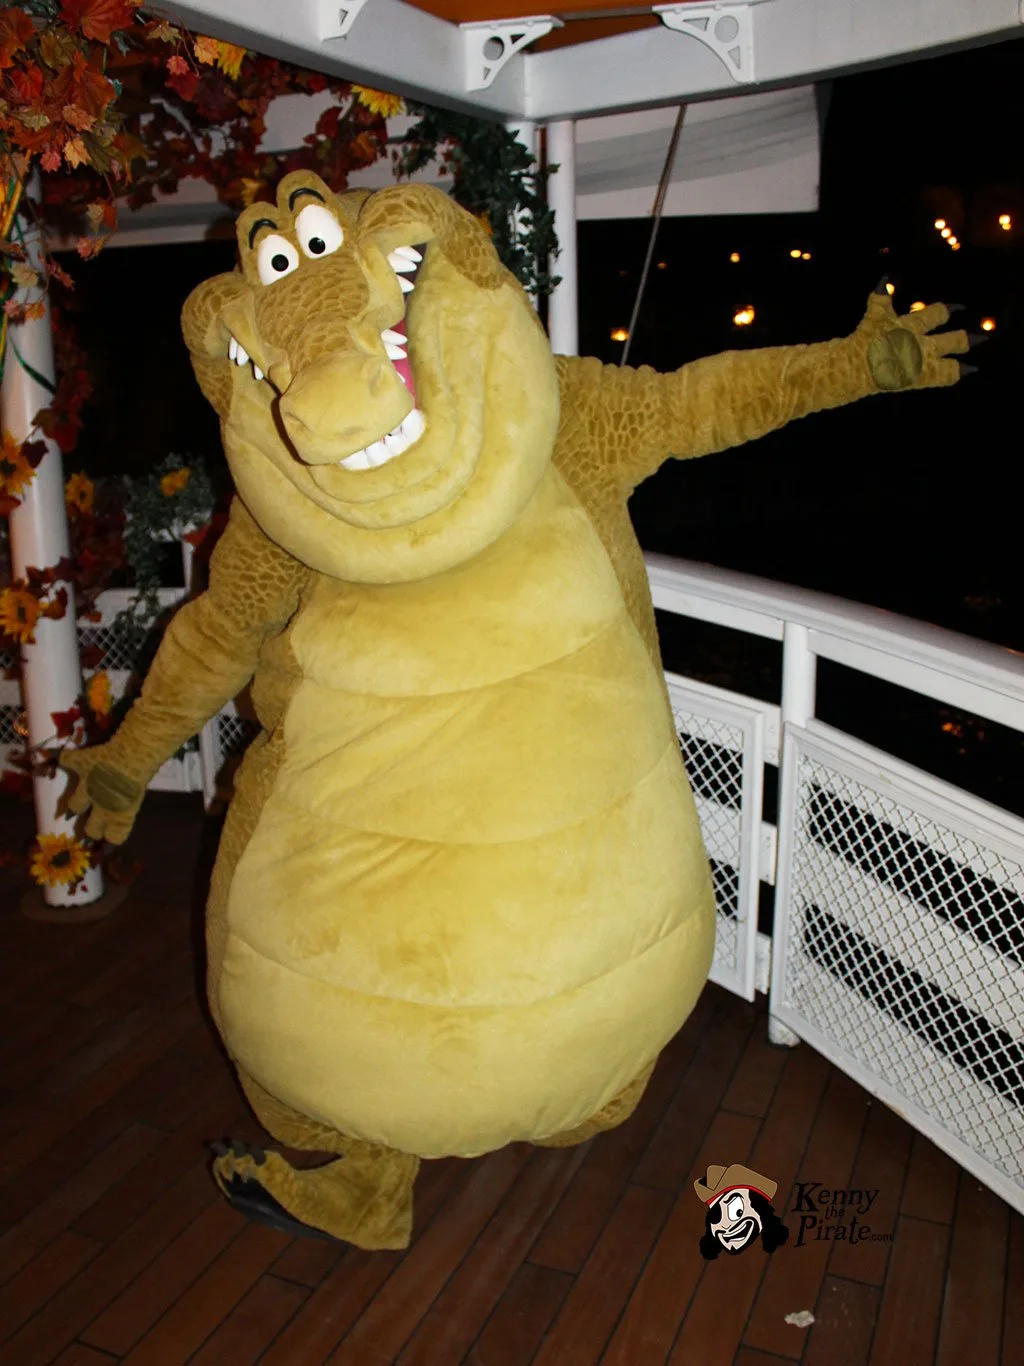 Louis the Alligator from Princess and the Frog at Disneyland Paris